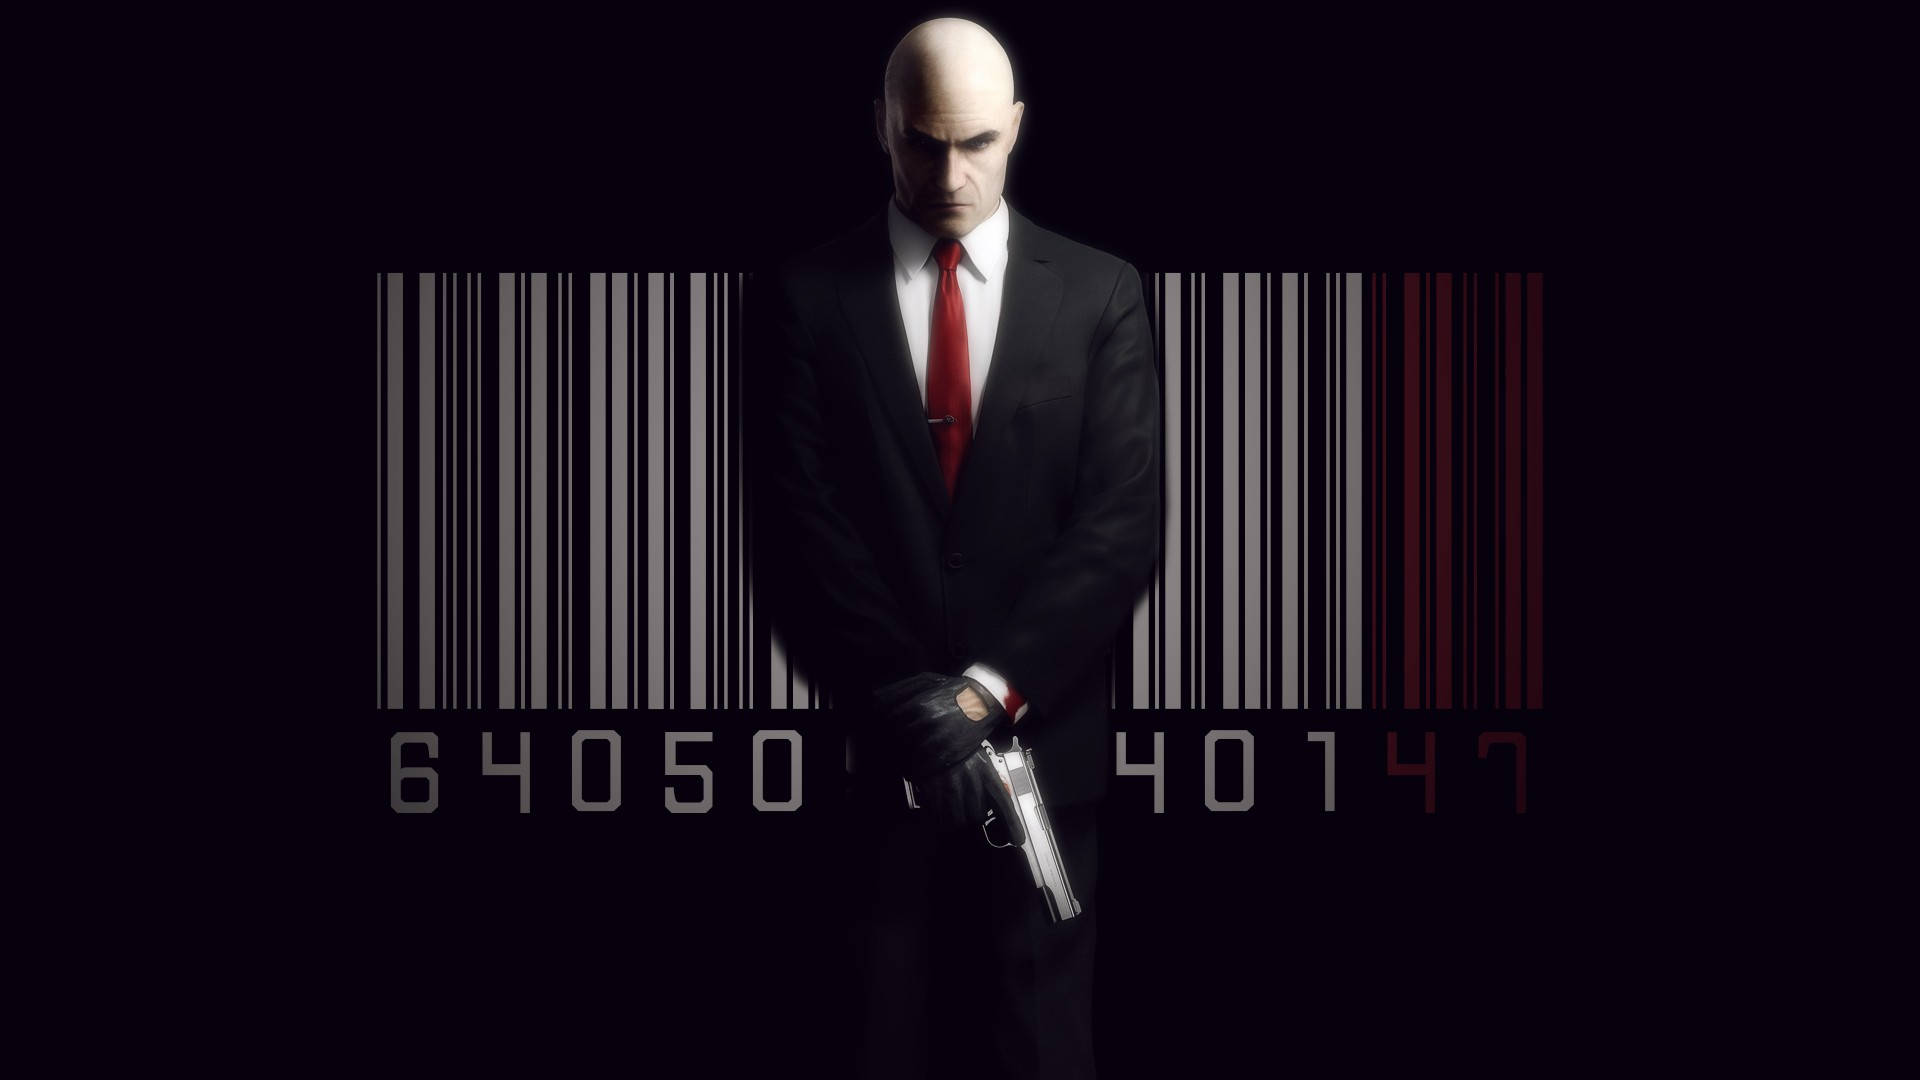 Hitman With Barcode Background